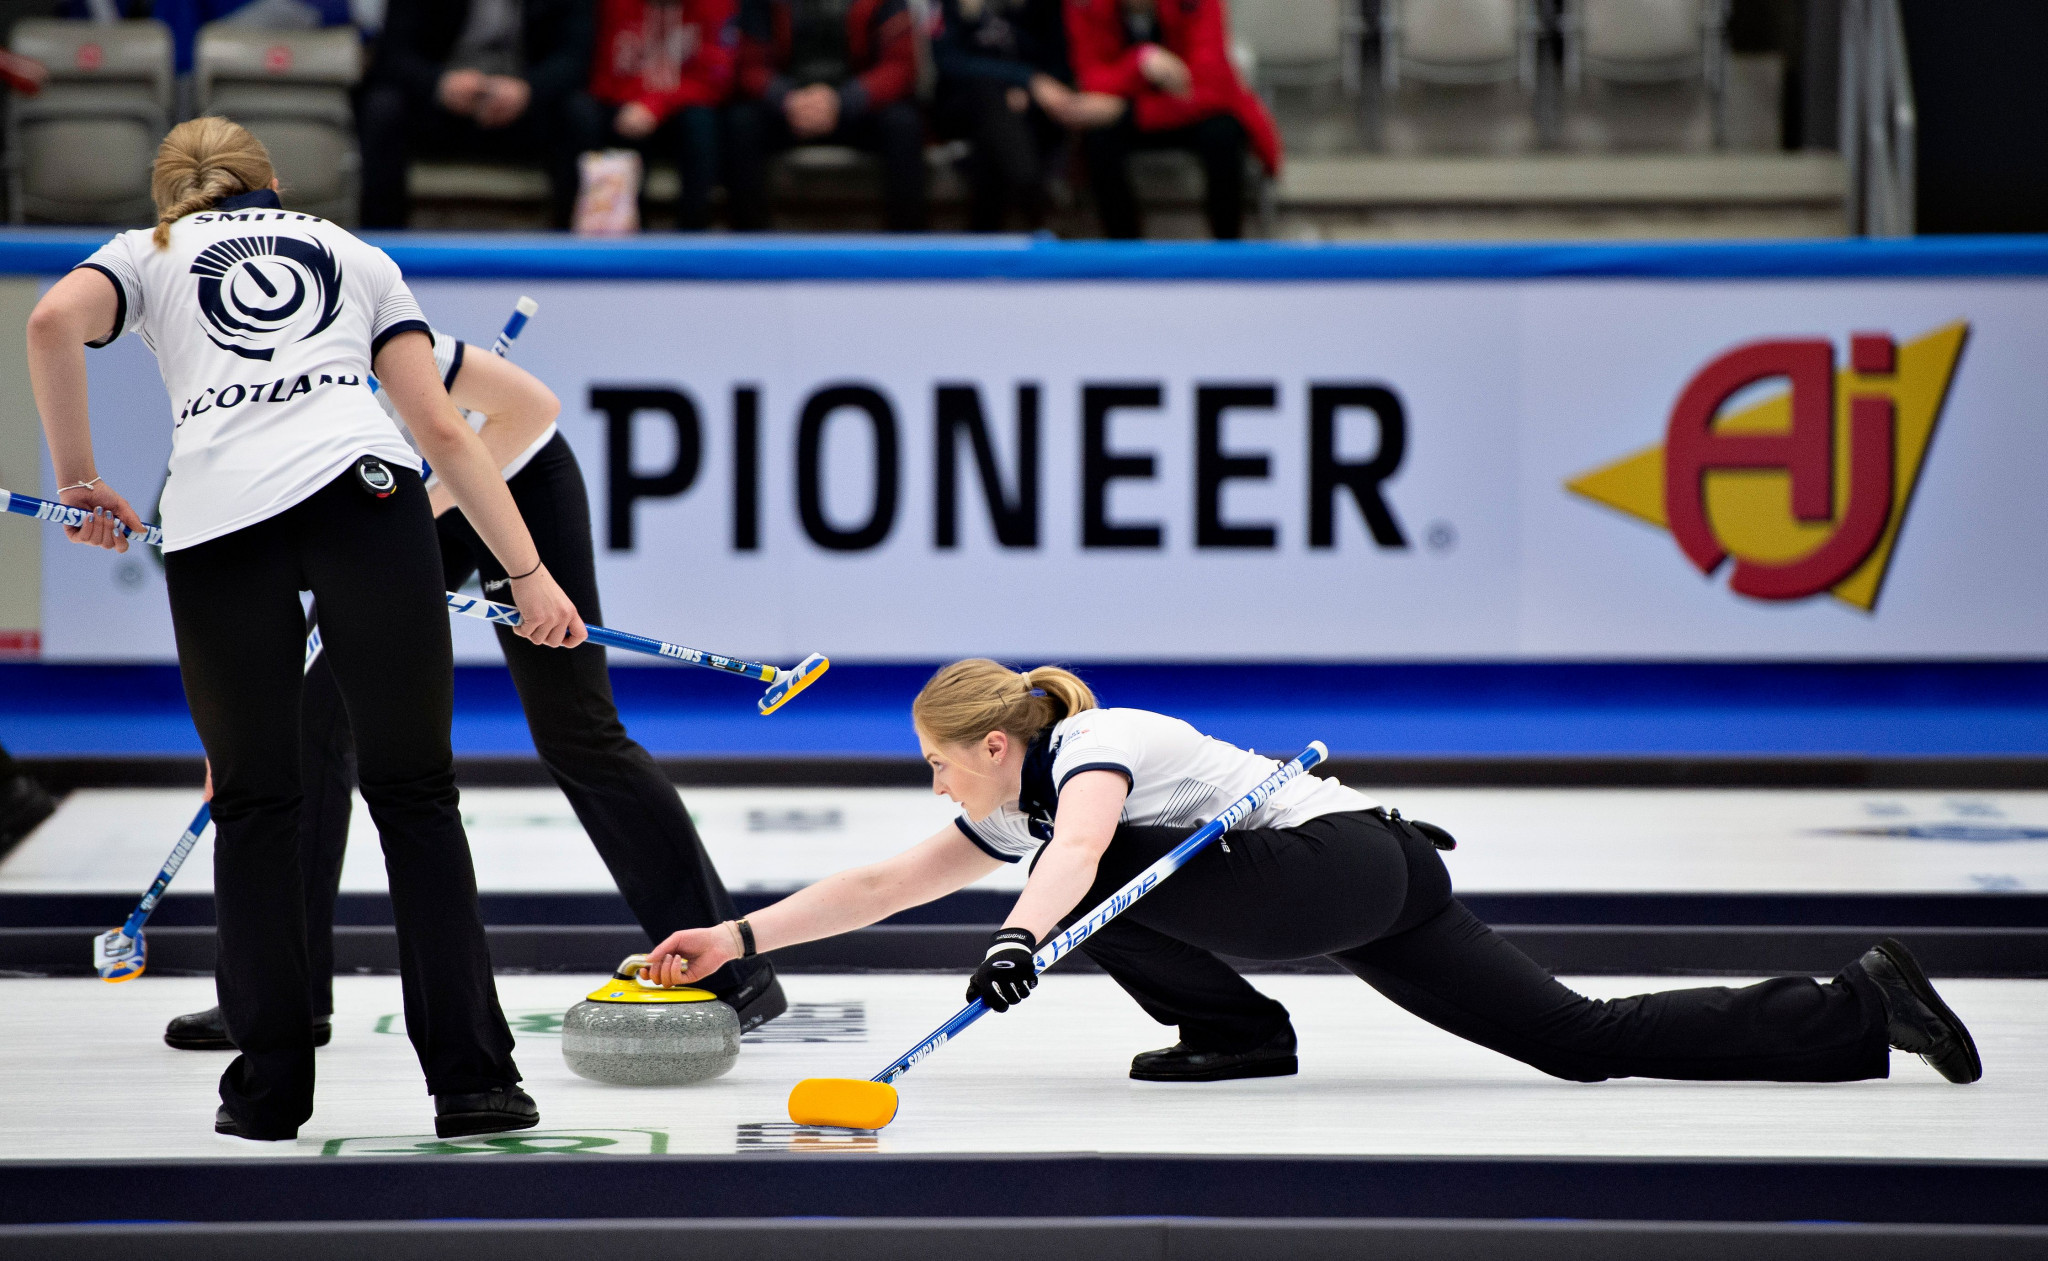 Scotland's women's team won the bronze medal at the 2016 European Curling Championships ©Getty Images